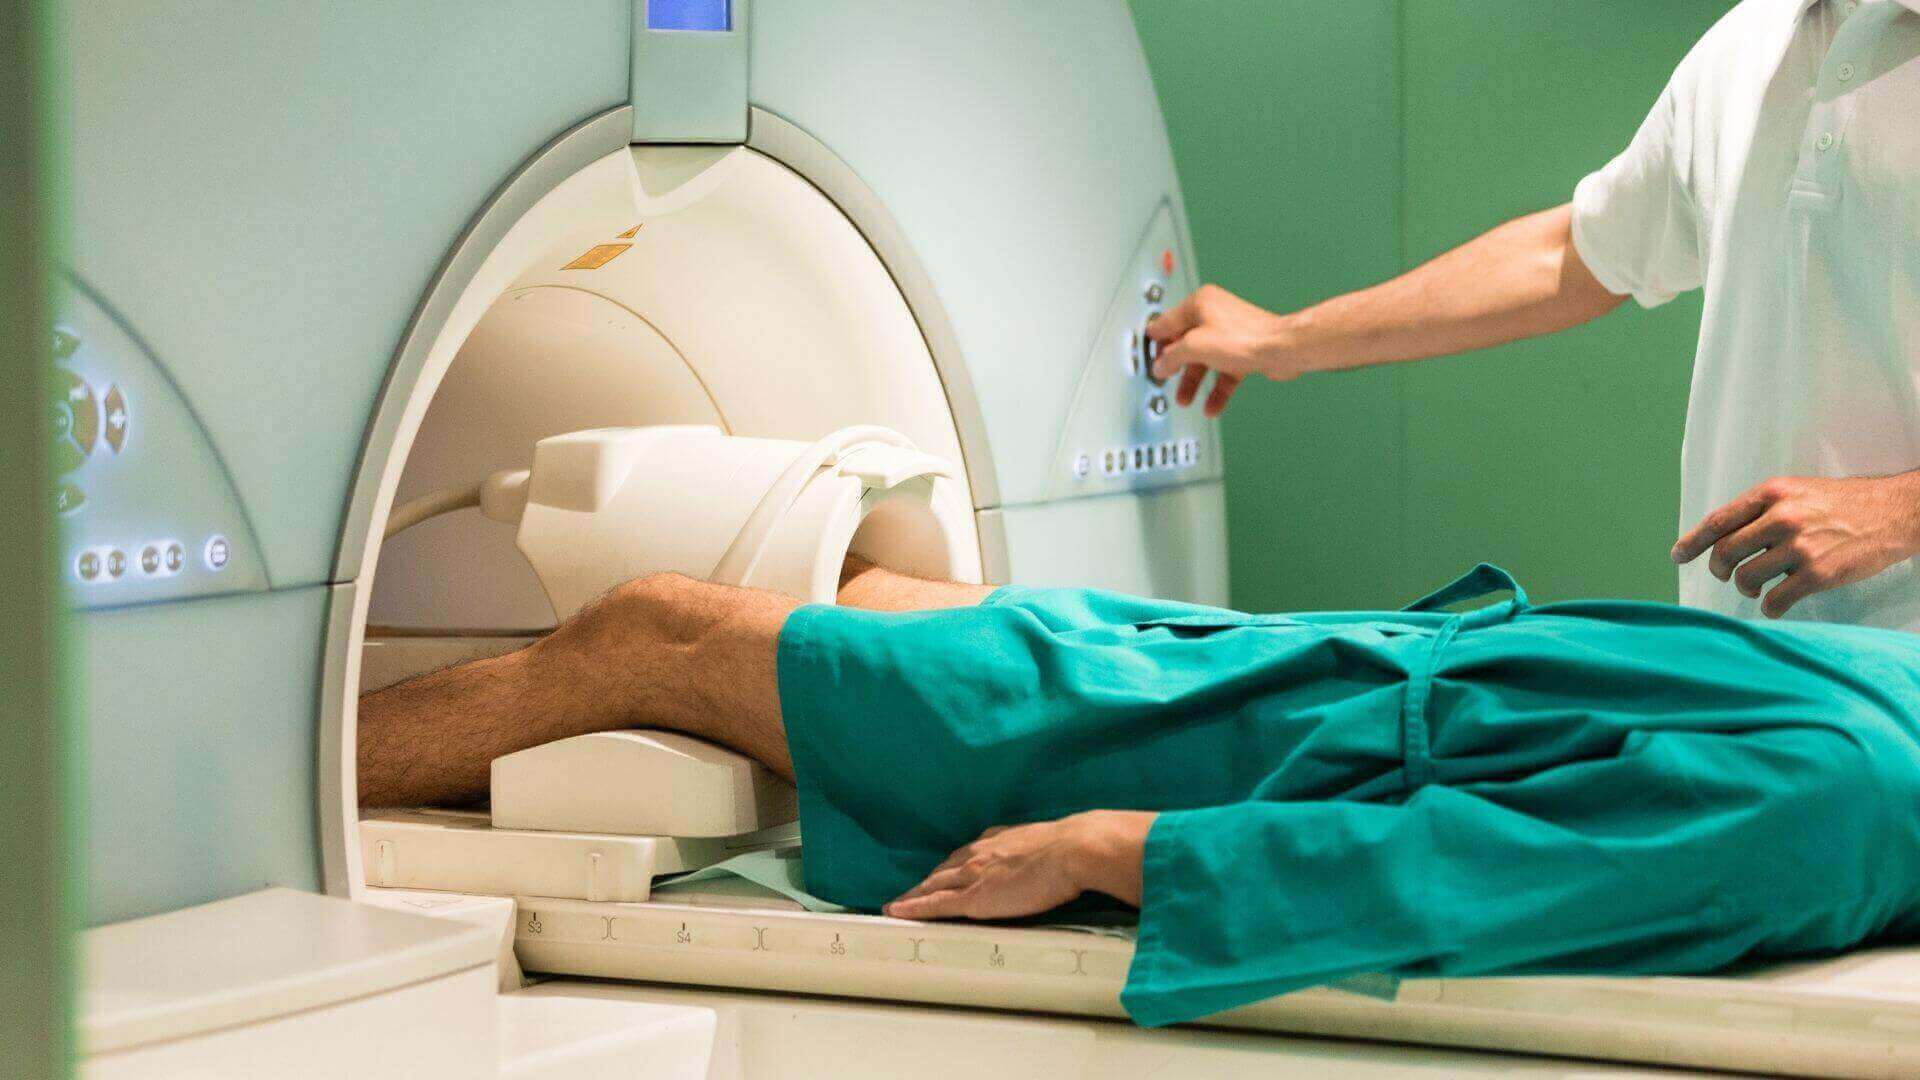 How Do I Become an MRI Technologist? | Gurnick Academy of Medical Arts